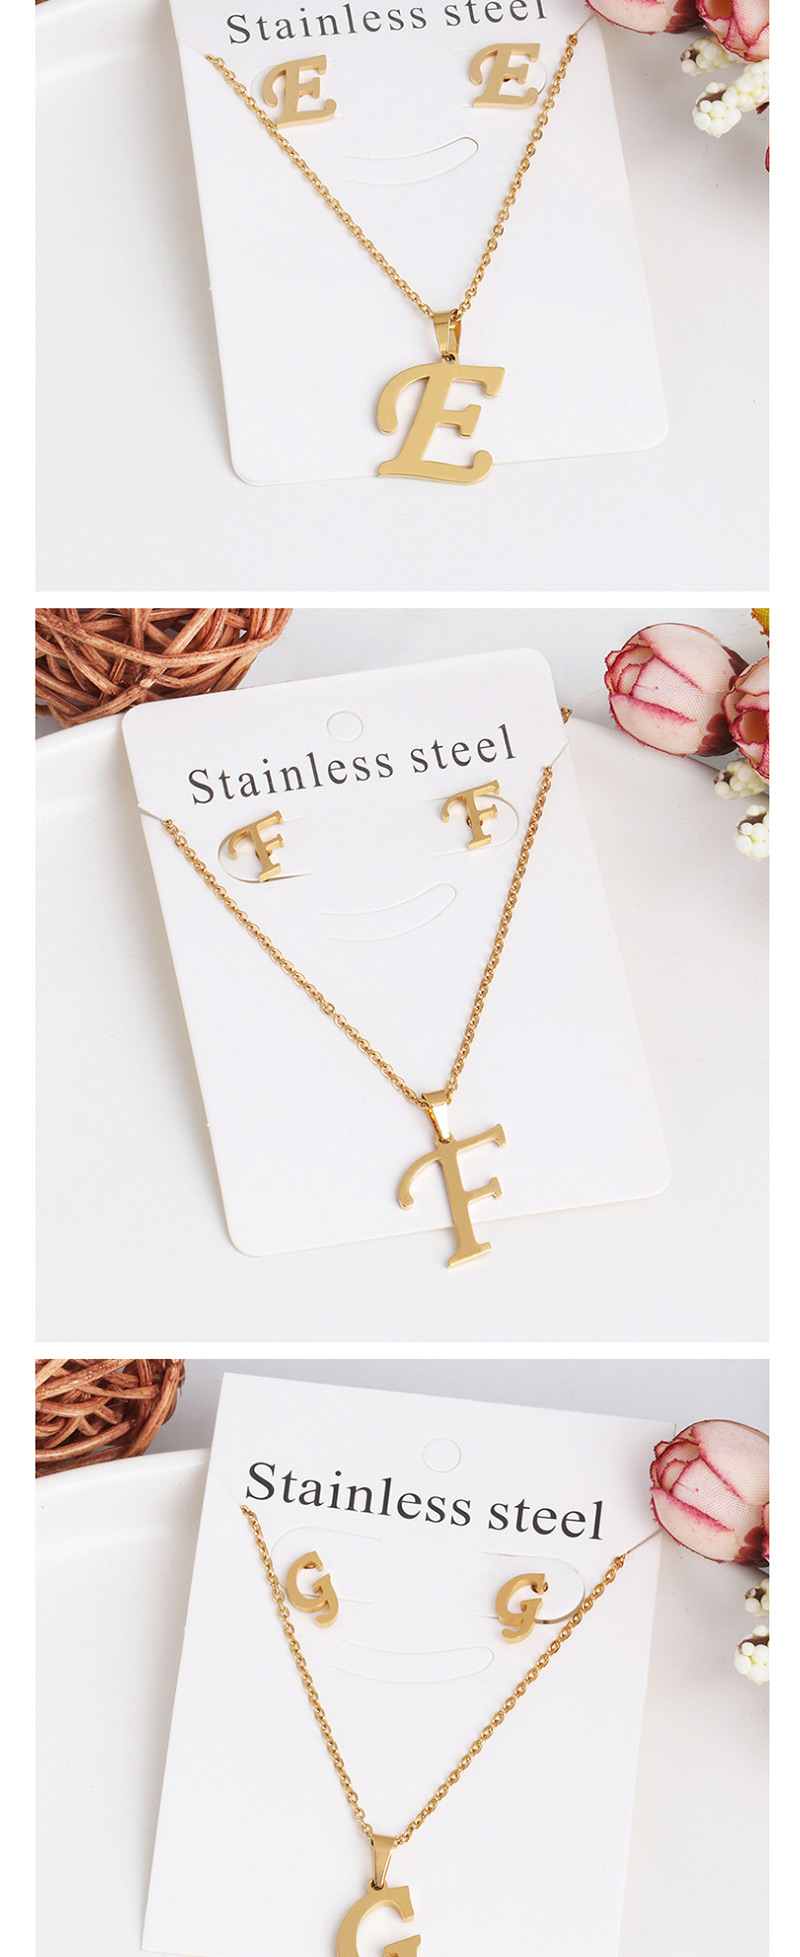 Fashion R Gold Stainless Steel Letter Necklace Earrings Two-piece,Jewelry Sets